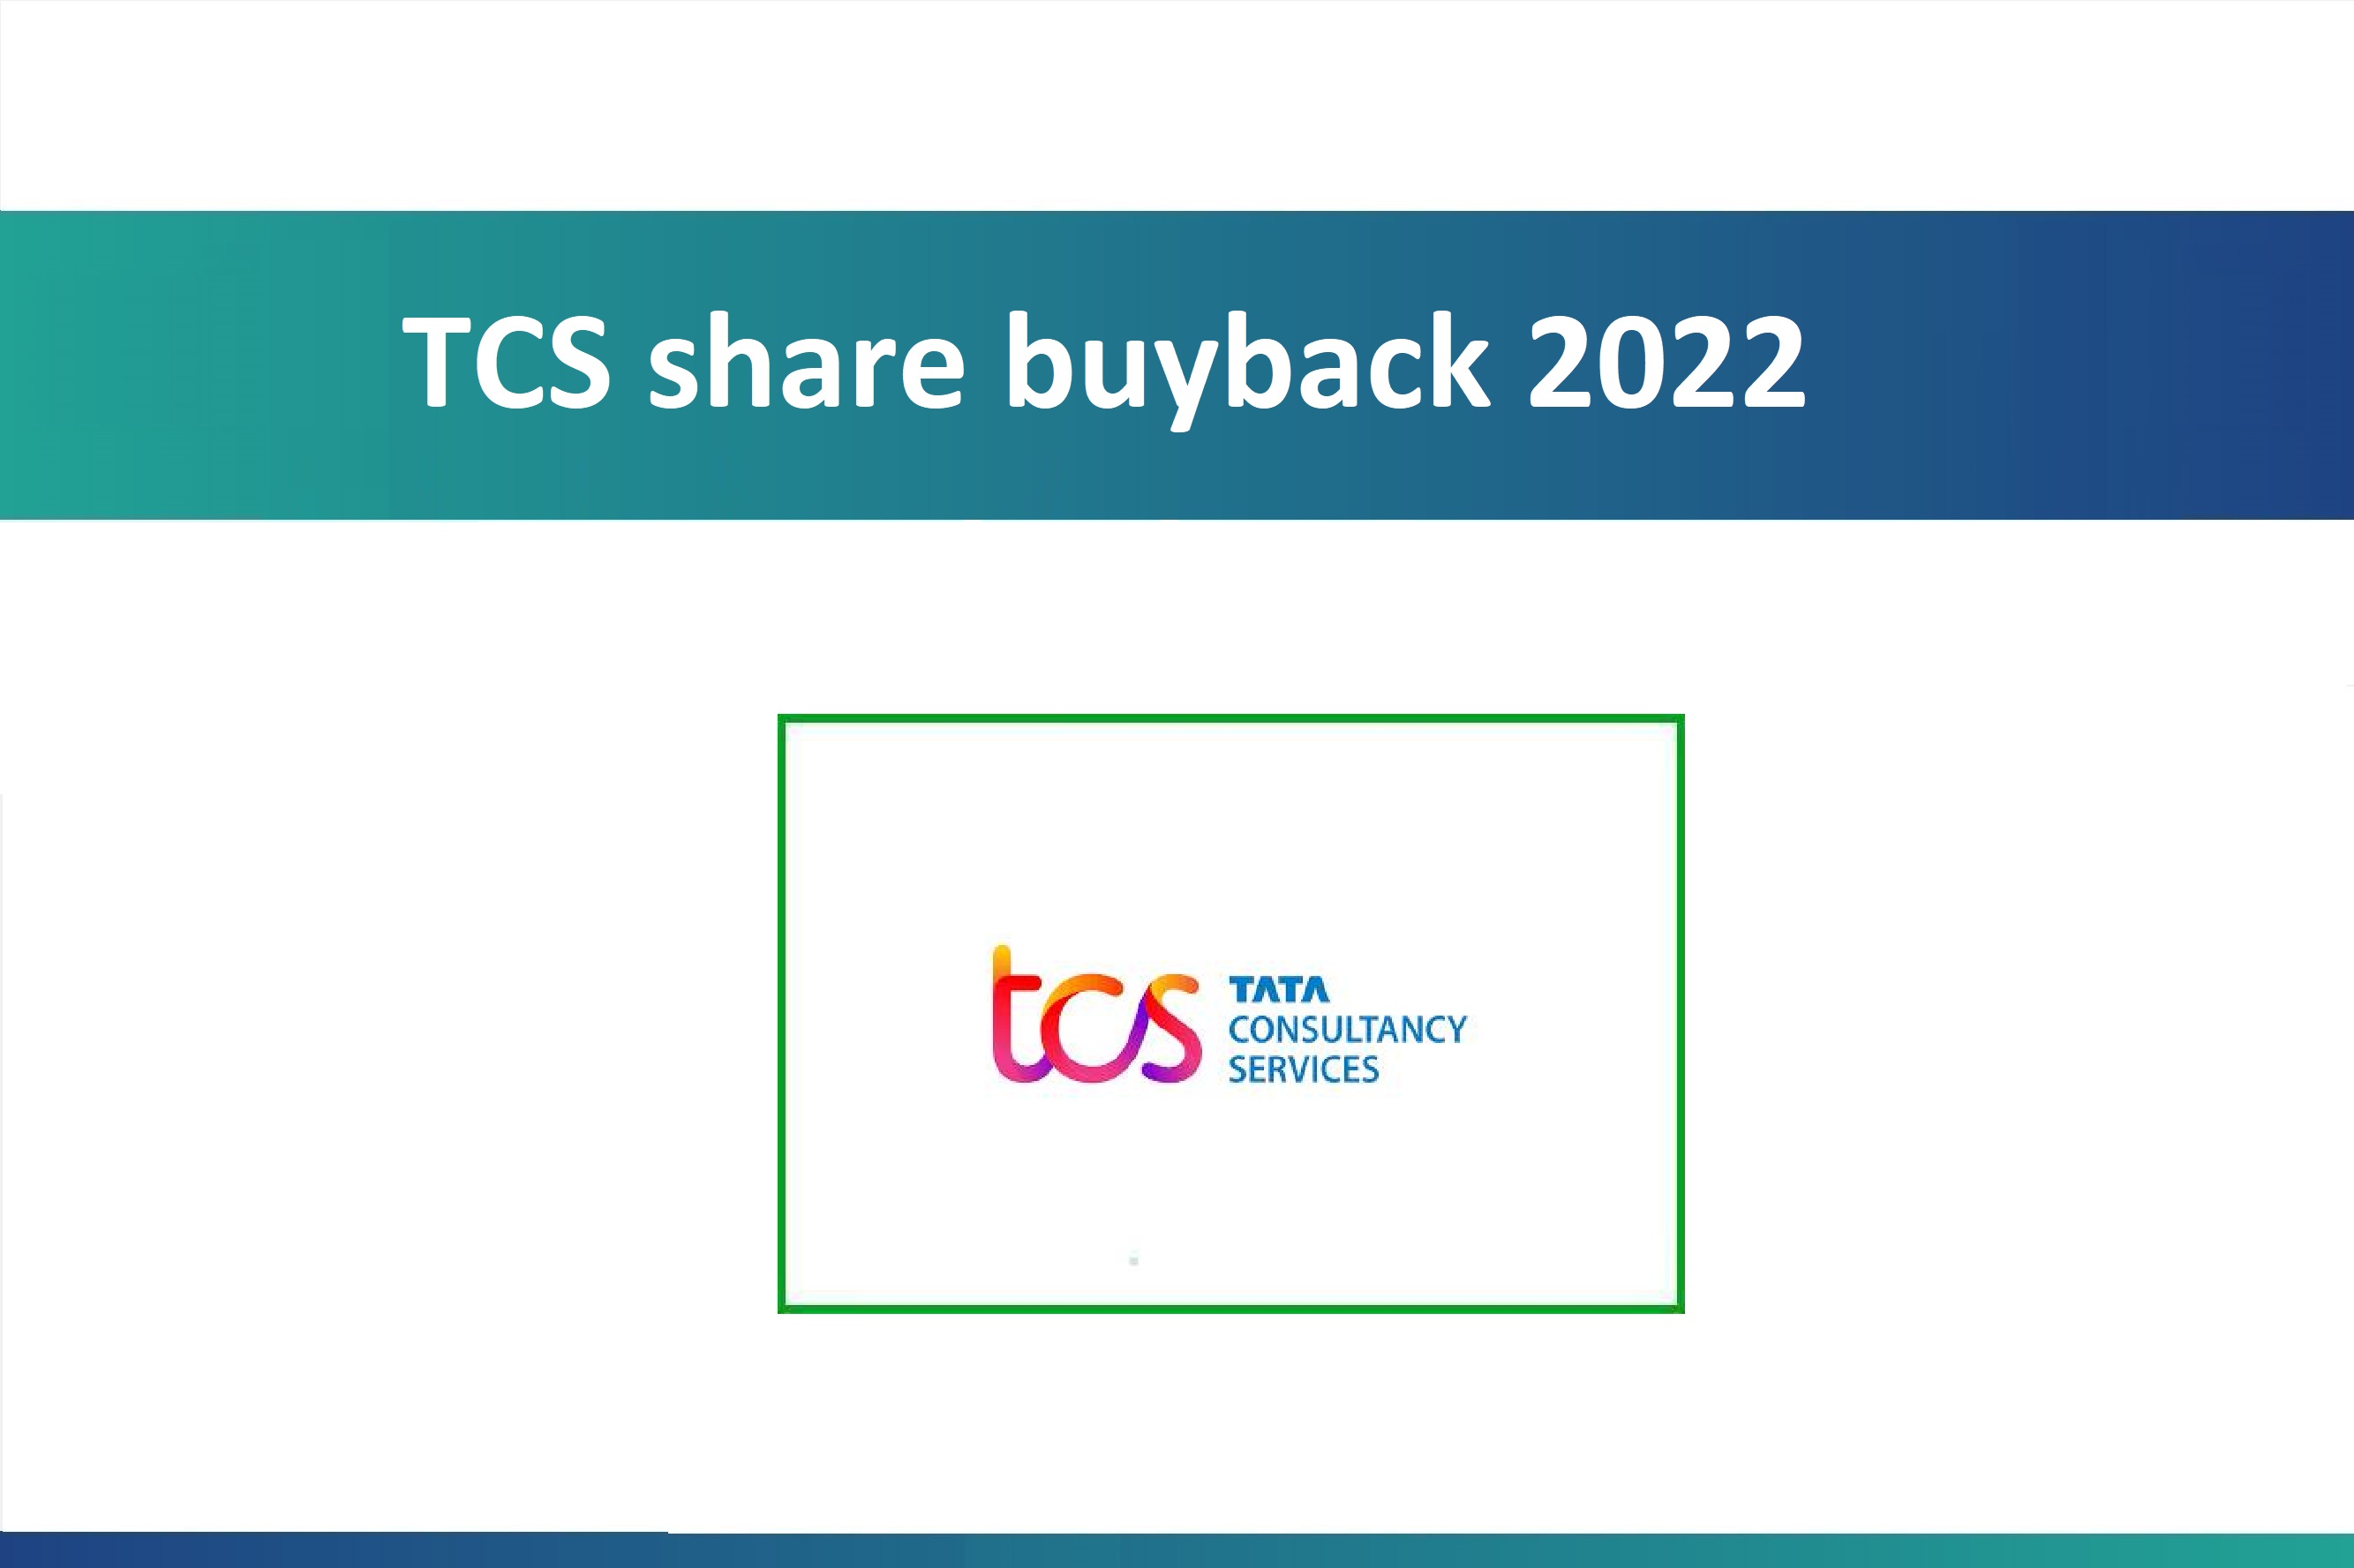 TCS share buyback 2022